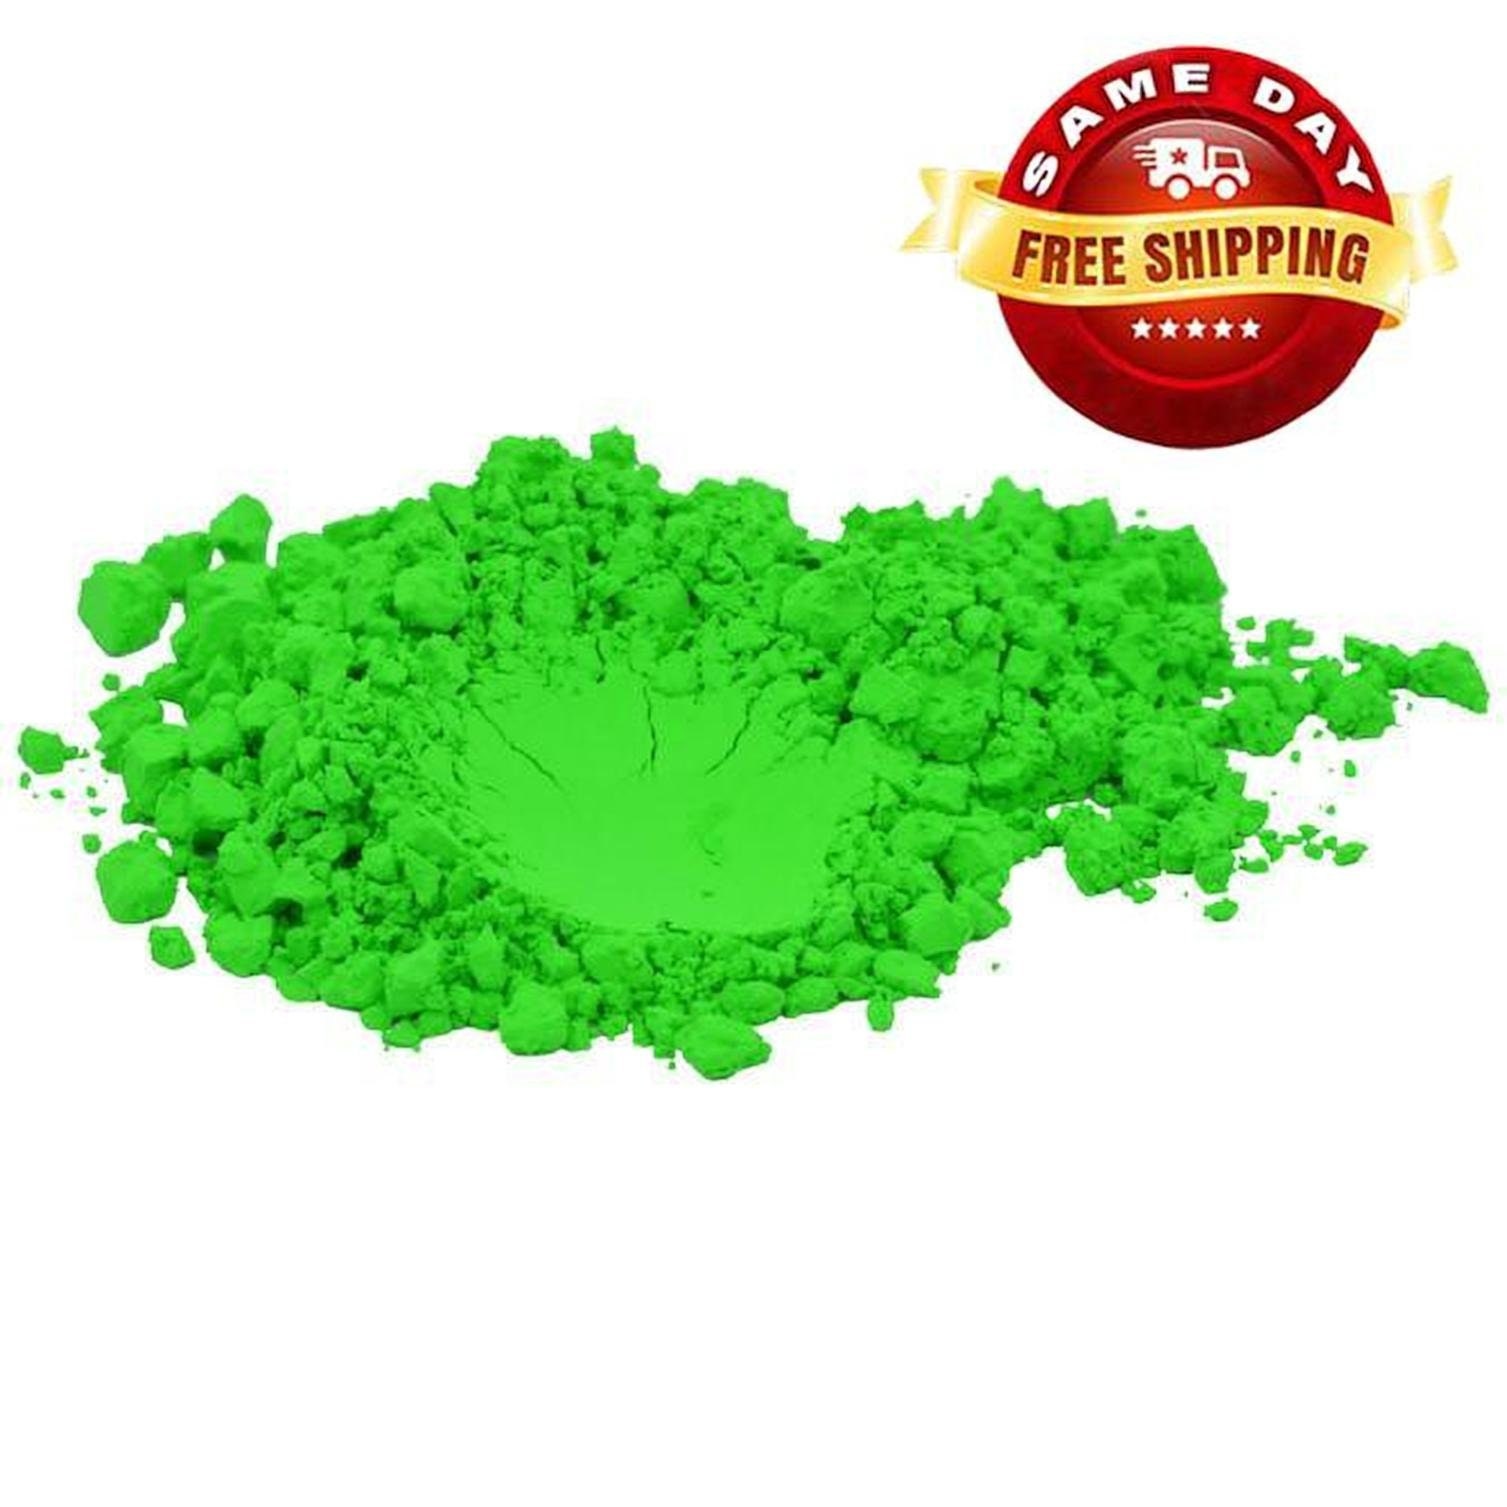 Mica Powder - Neon Yellow for car freshies, soap making, candle making and  Aroma Beads and resins